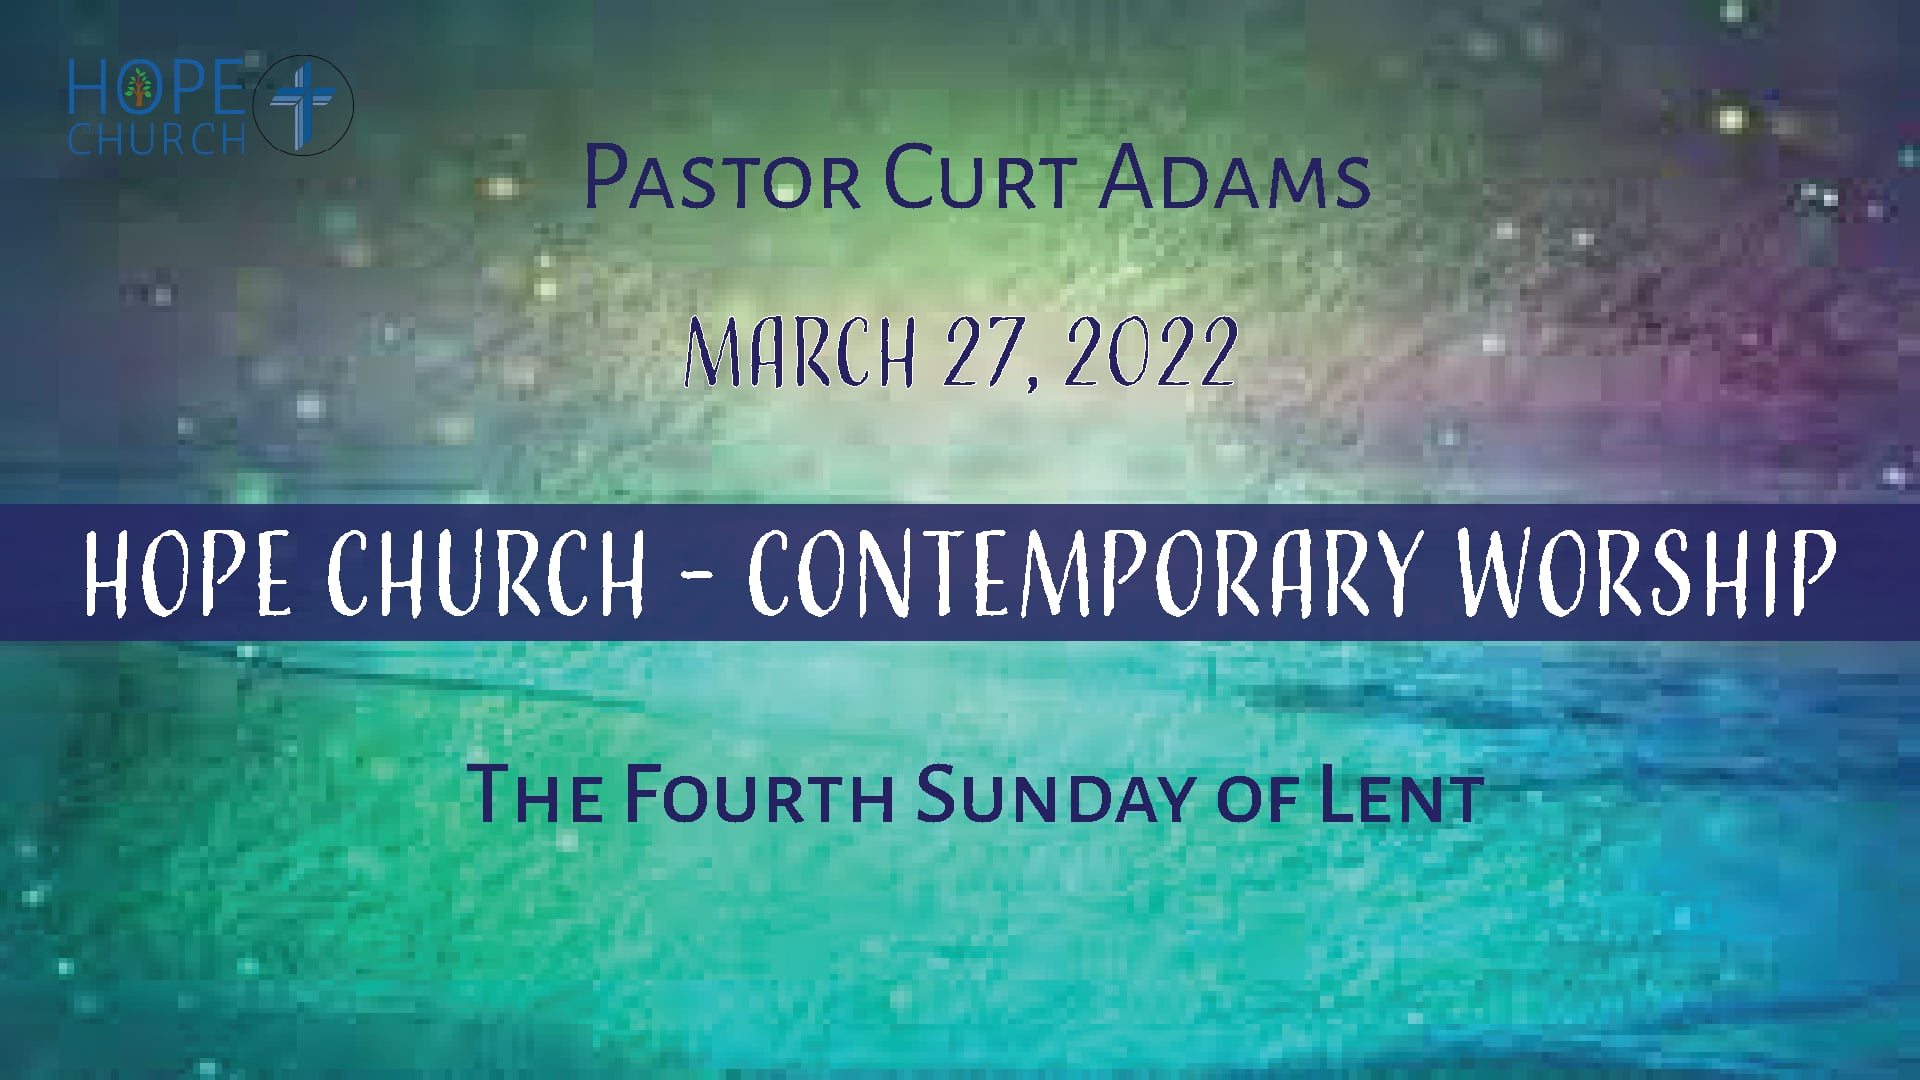 Hope Church - Contemporary Worship March 27, 2022